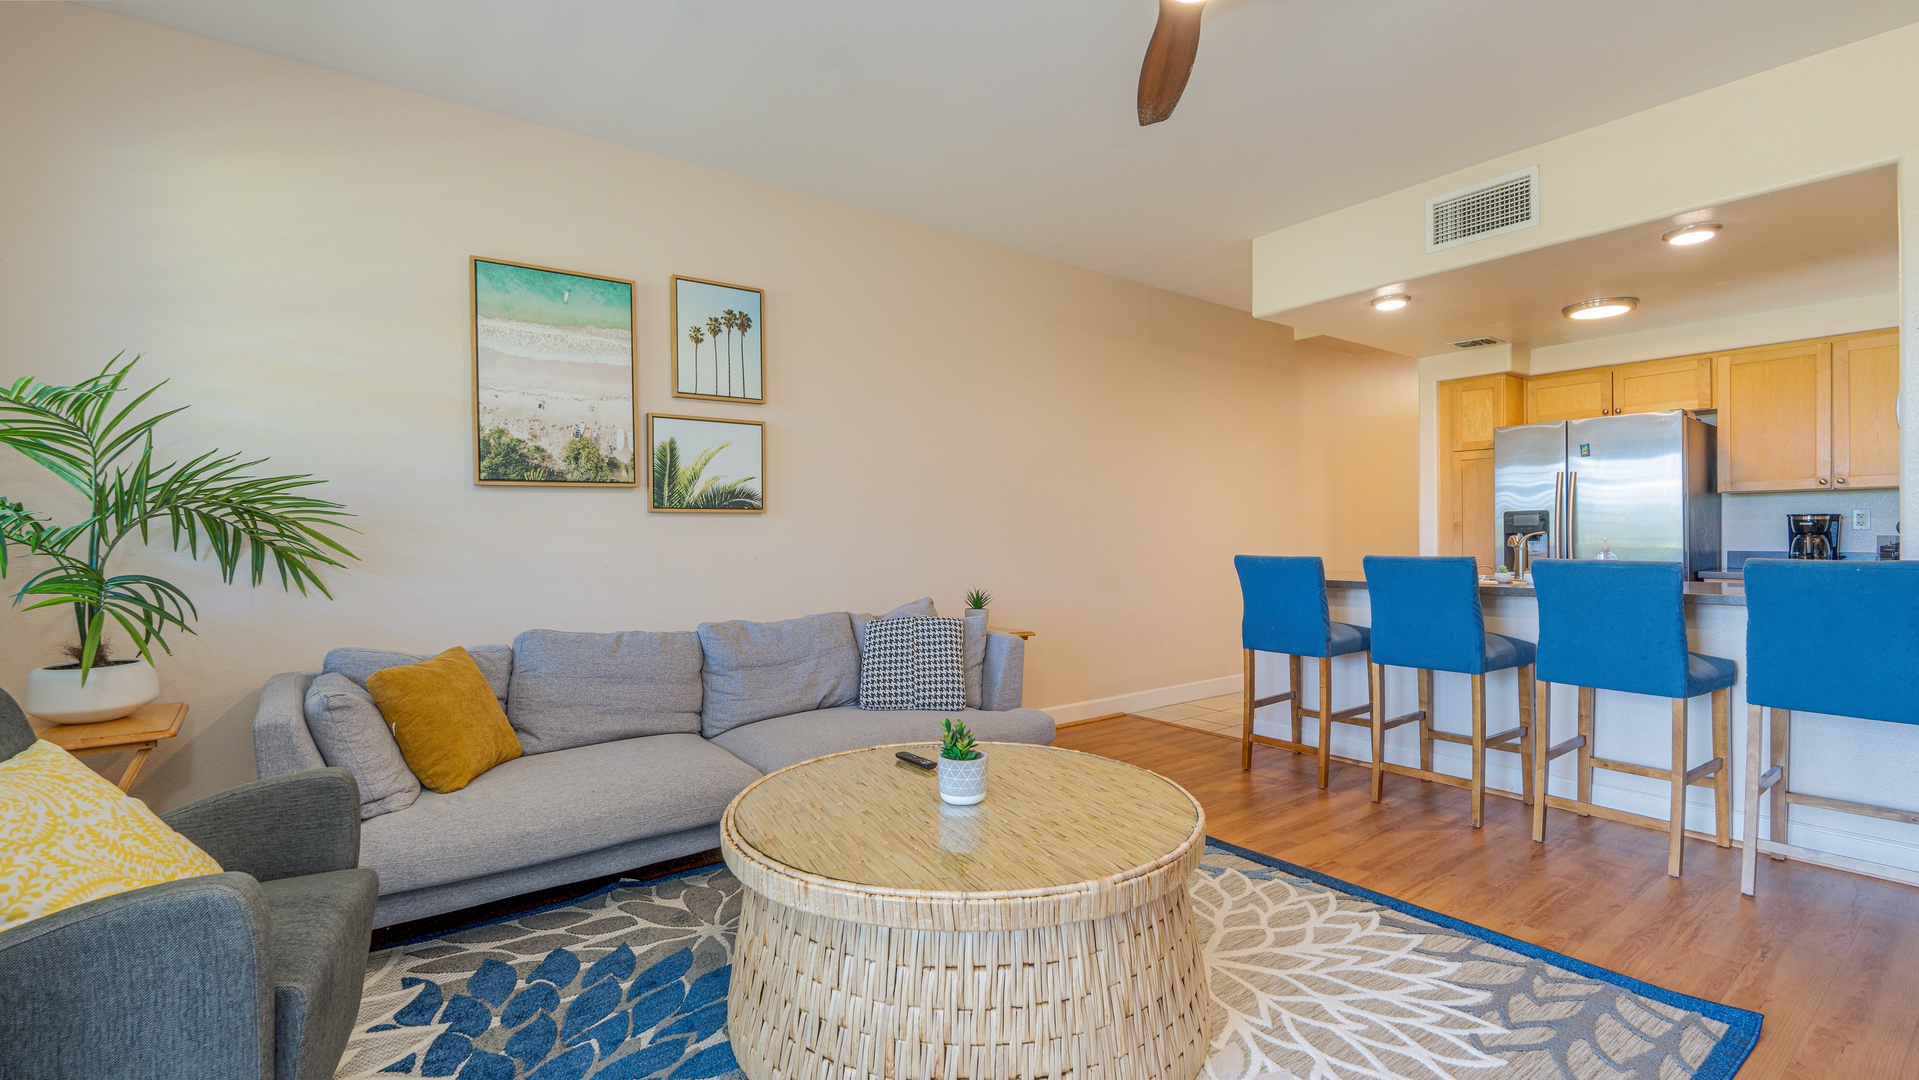 Kapolei Vacation Rentals, Hillside Villas 1496-2 - Sink into the plush seating in the living area surrounded by natural wood tones.